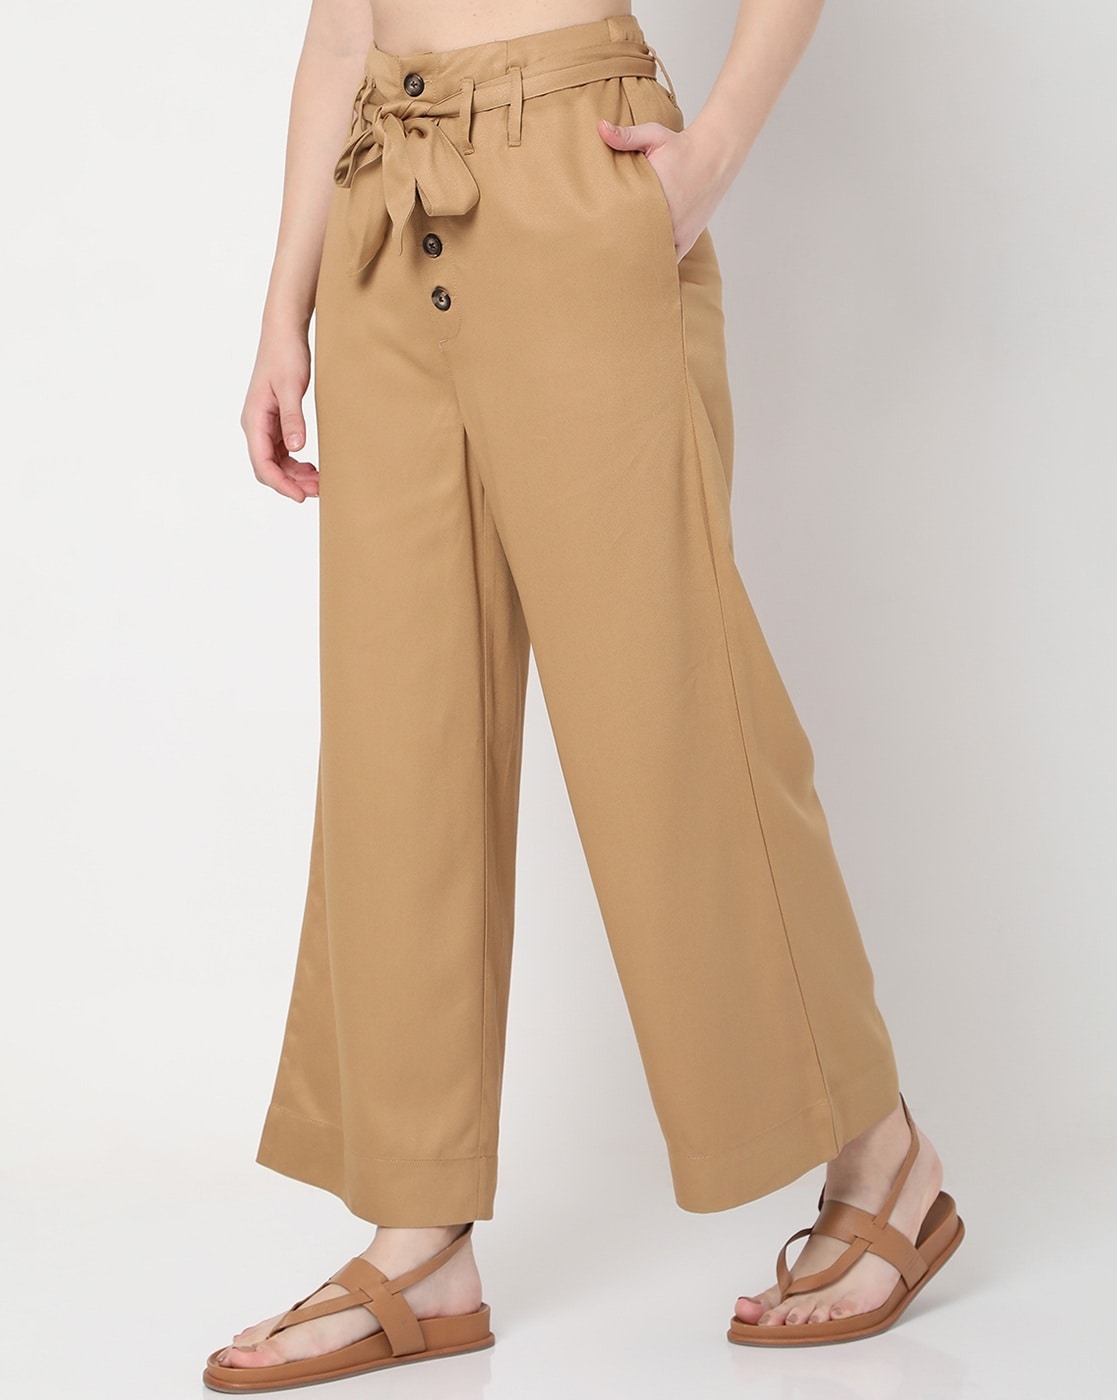 Vero Moda Olive Straight Fit High rise Pants